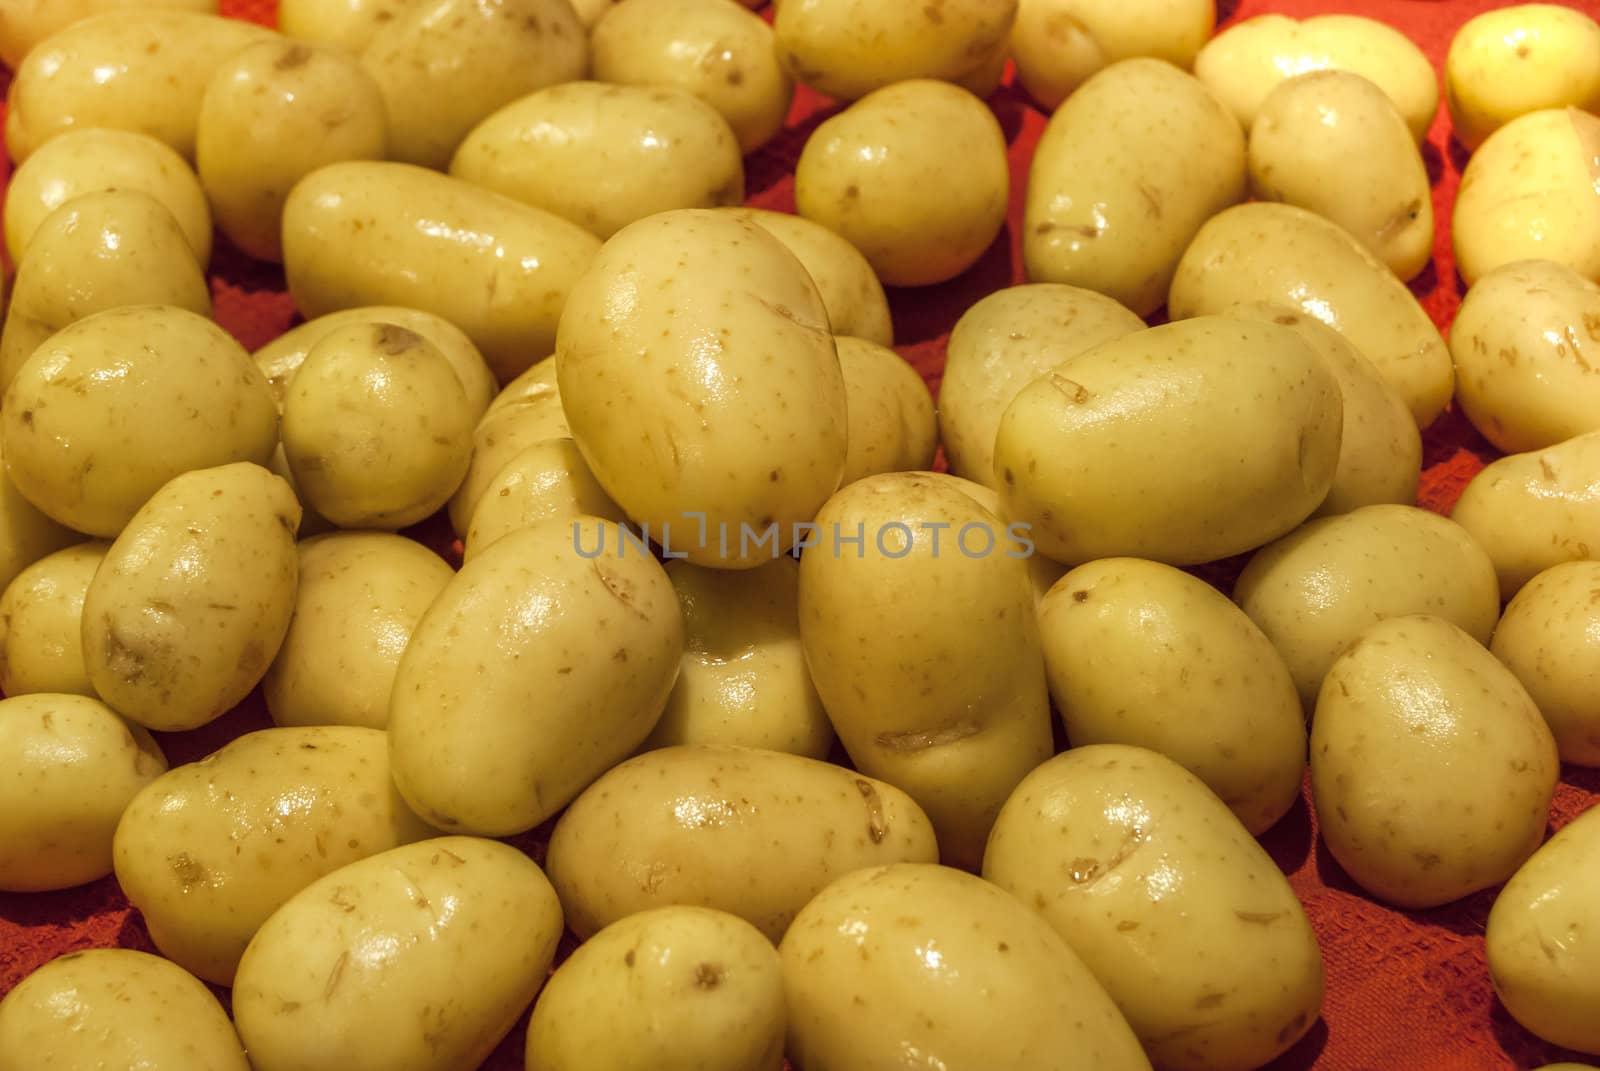 Washed fresh new potatoes closeup ready for cooking